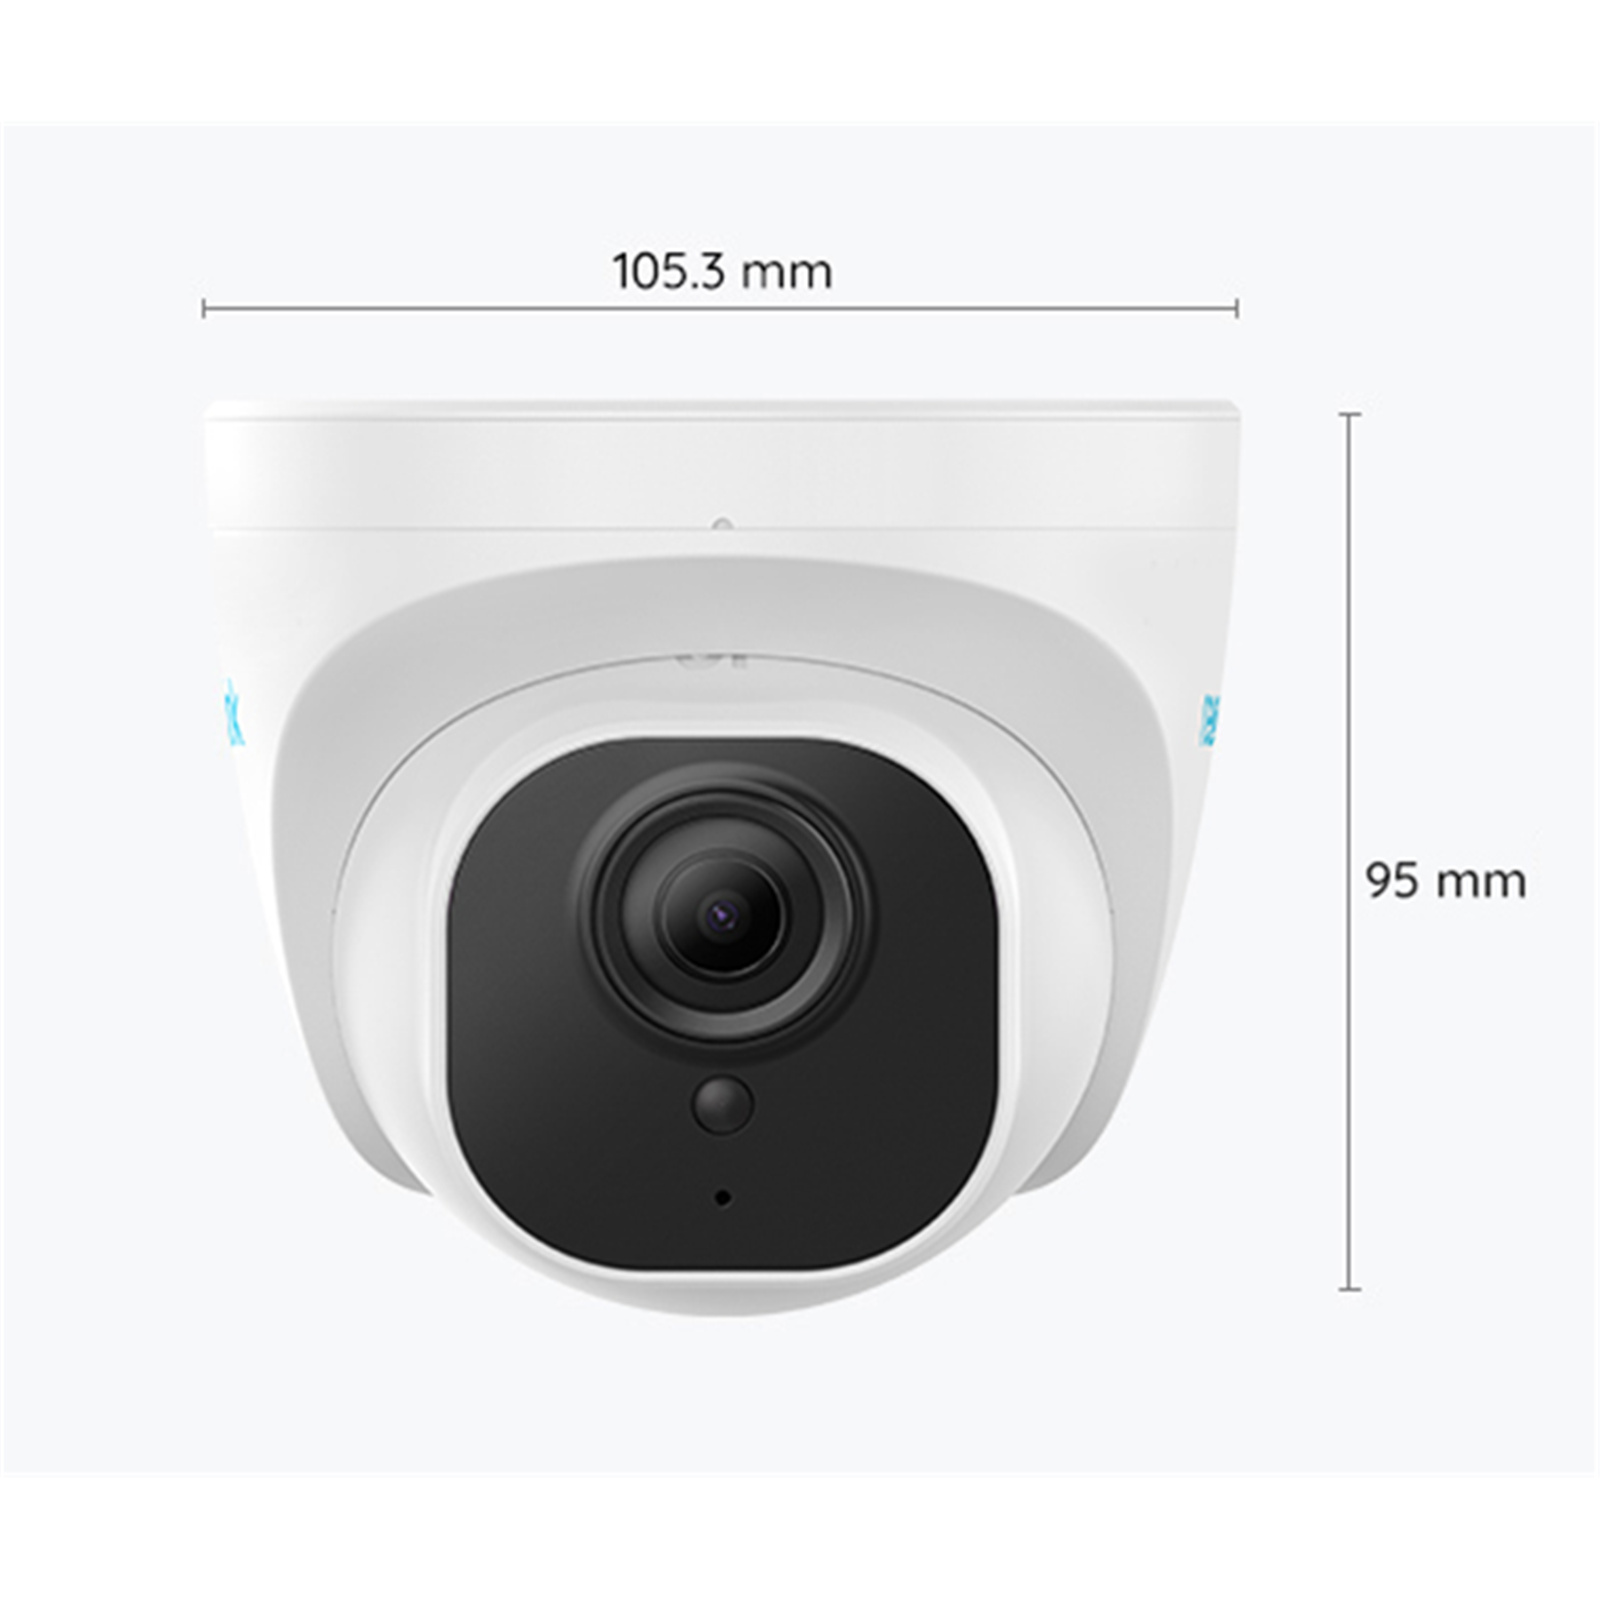 Reolink Rlc-520a Poe Ip Camera Dome Security Outdoor Video Surveillance  Camera Cctv Person Vehicle Detection Night Vision - Ip Camera - AliExpress